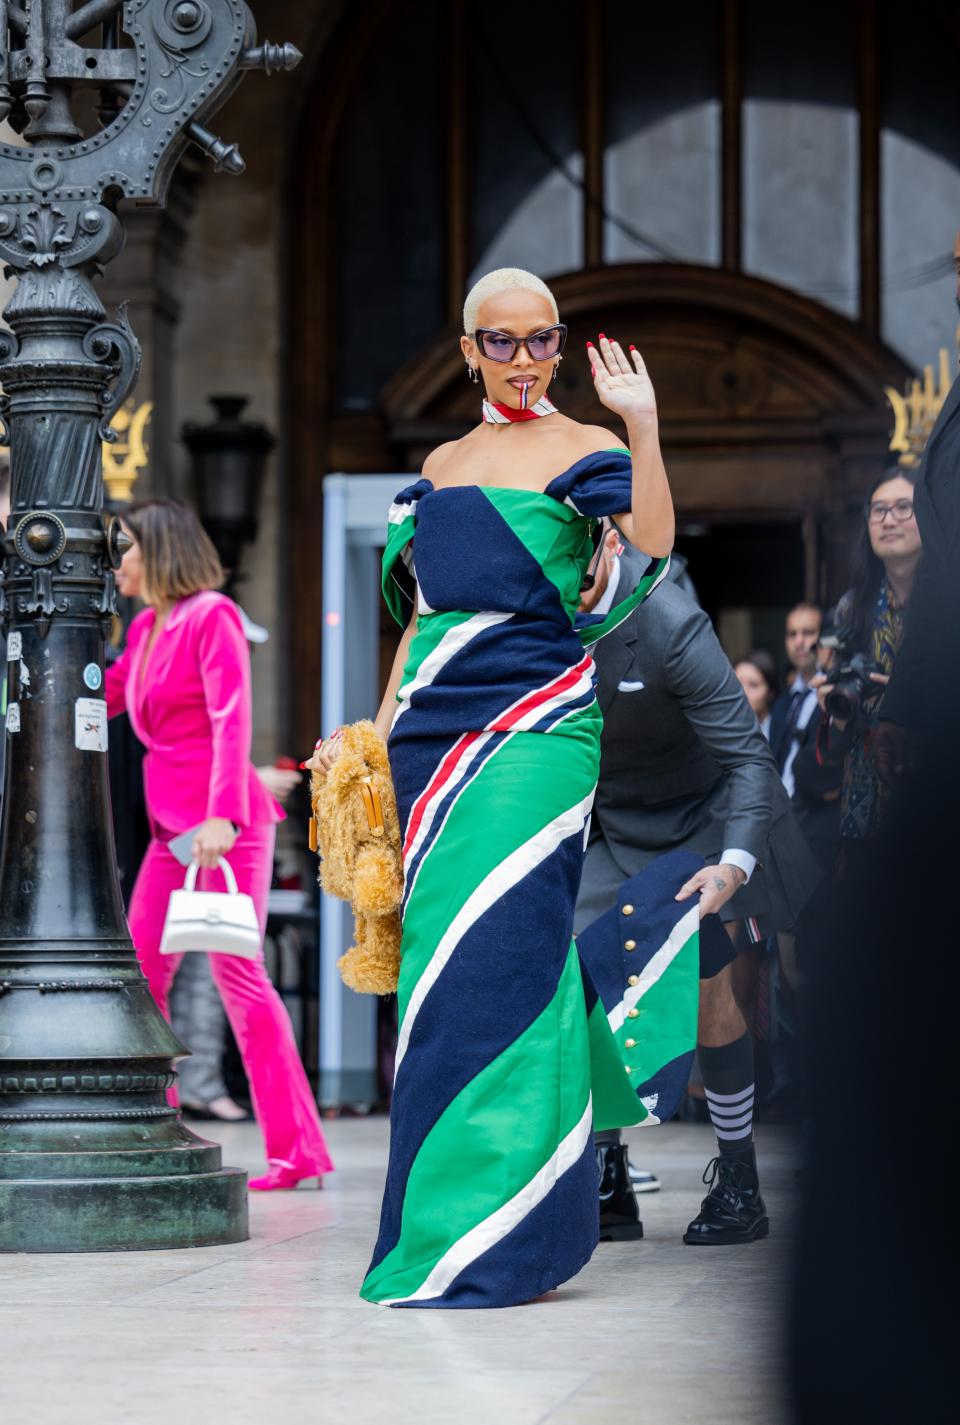 Doja Cat attends Thom Browne show during Paris Fashion Week on October 3, 2022.